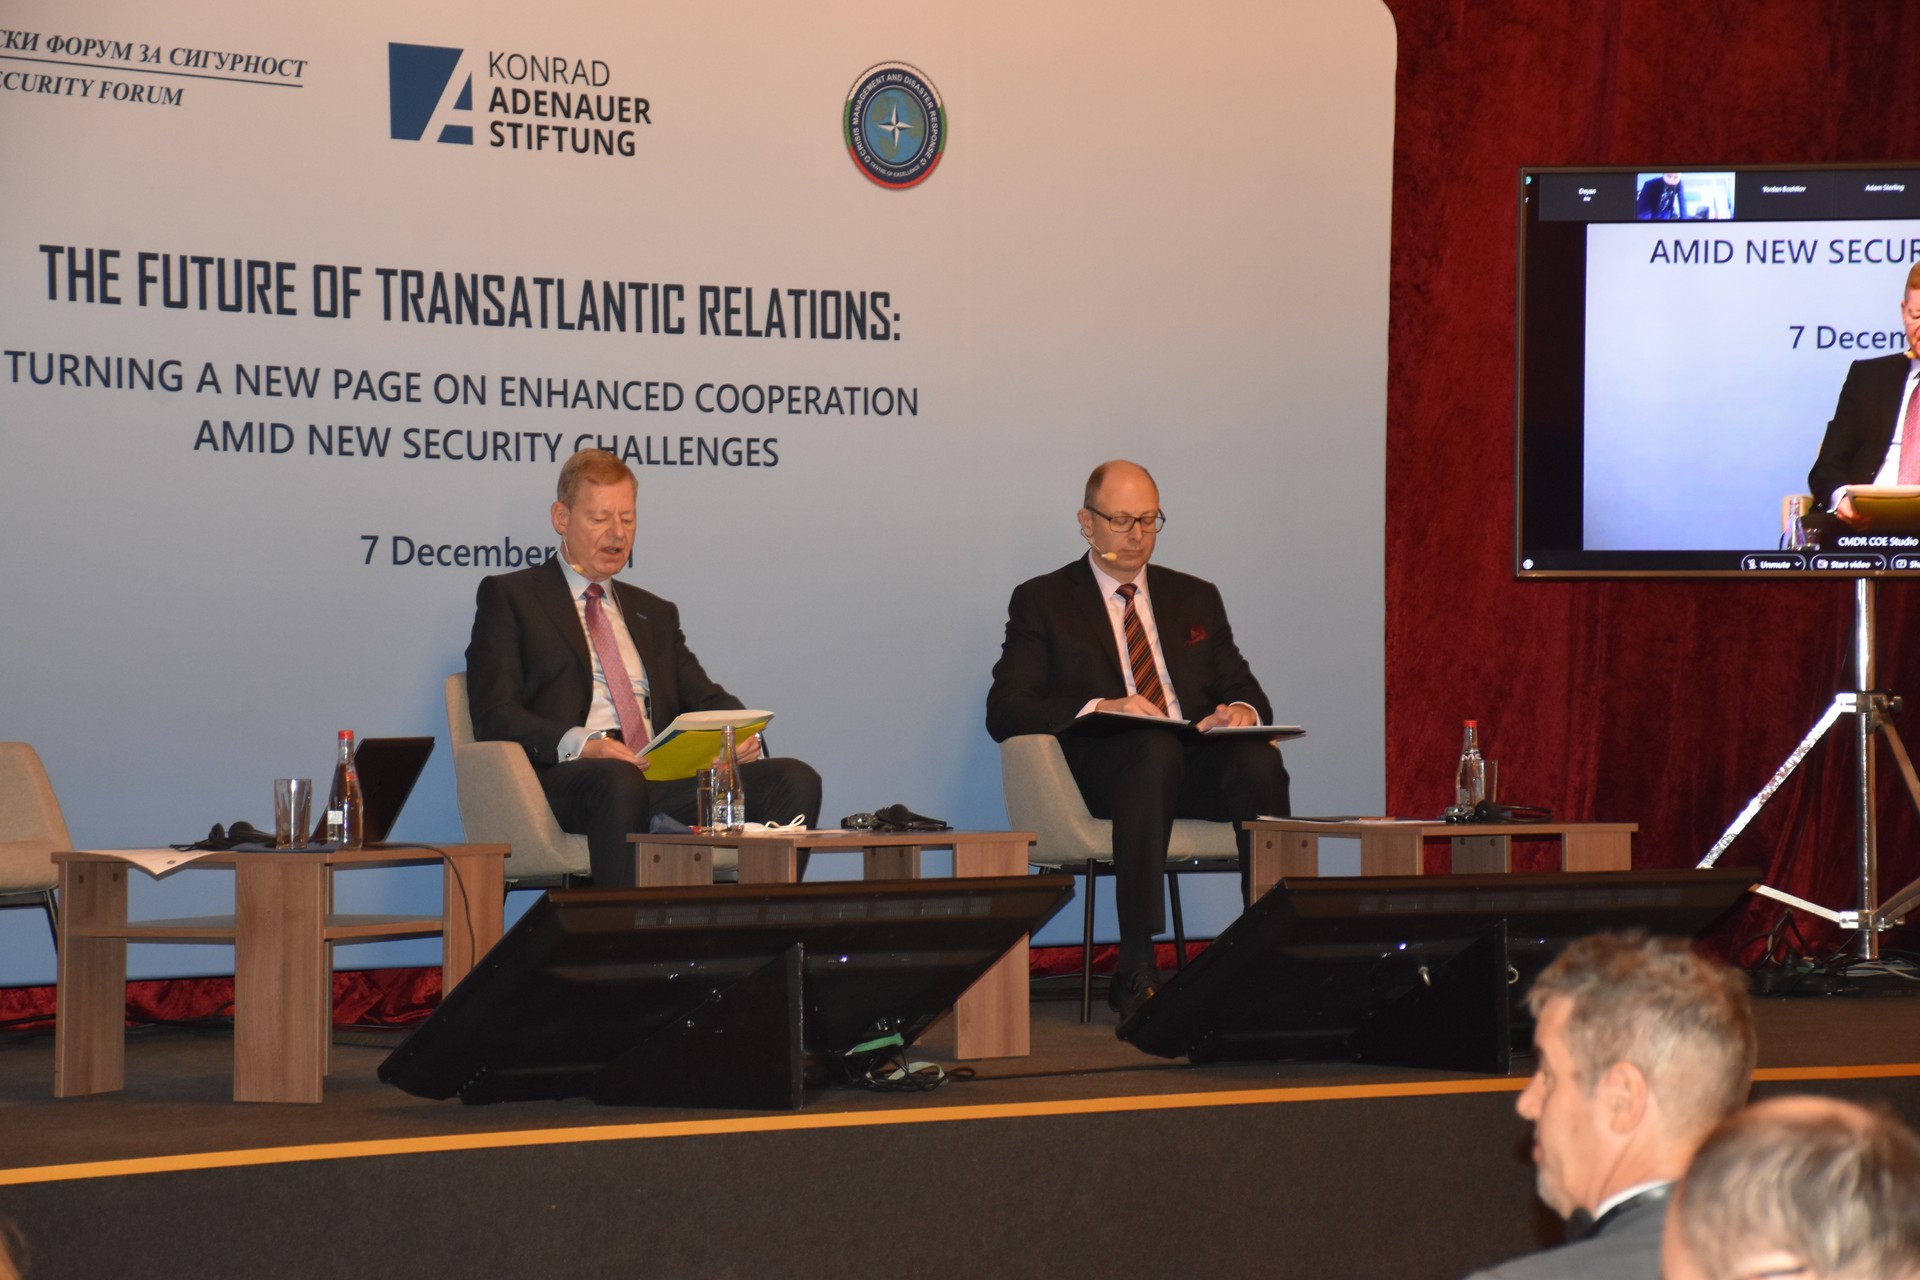 THE FUTURE OF TRANSATLANTIC RELATIONS: TURNING A NEW PAGE ON ENHANCED COOPERATION